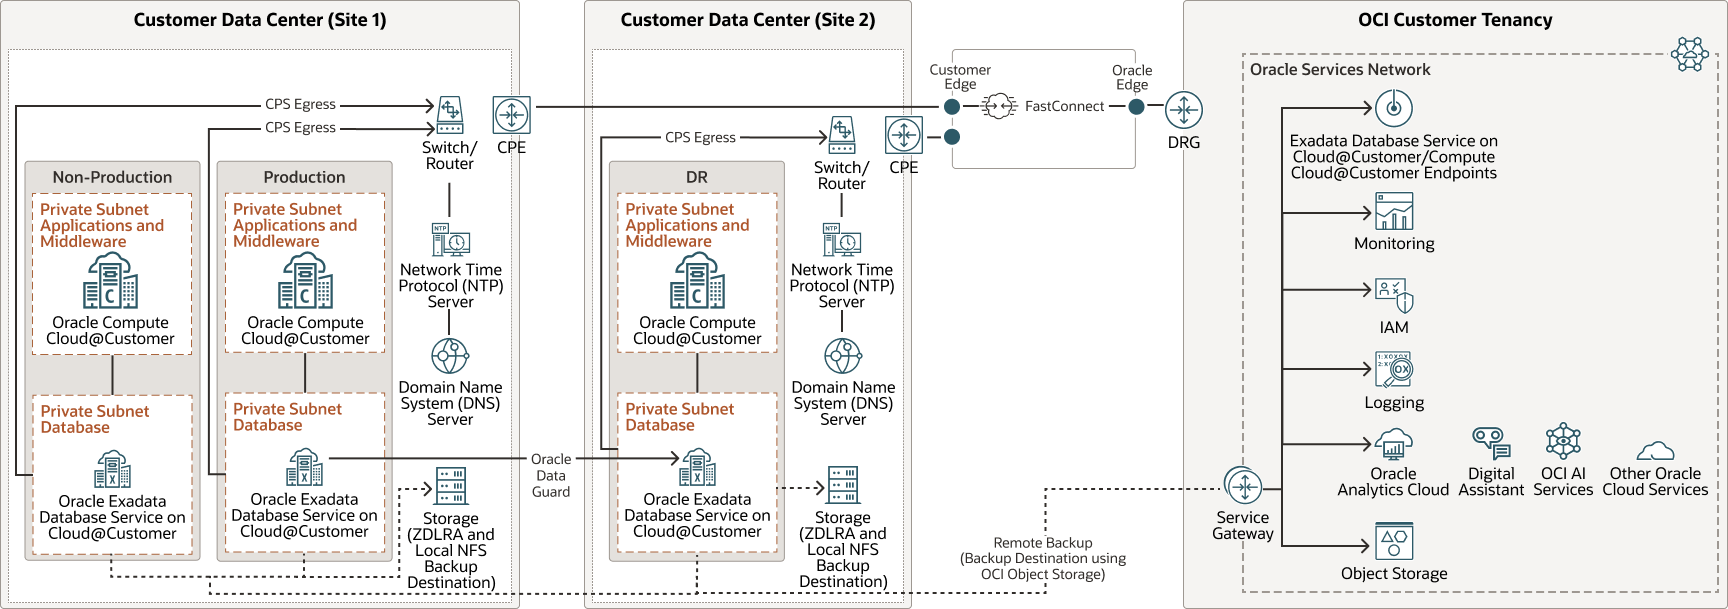 multicloud-customer-and-oci-dr.pngの説明が続きます